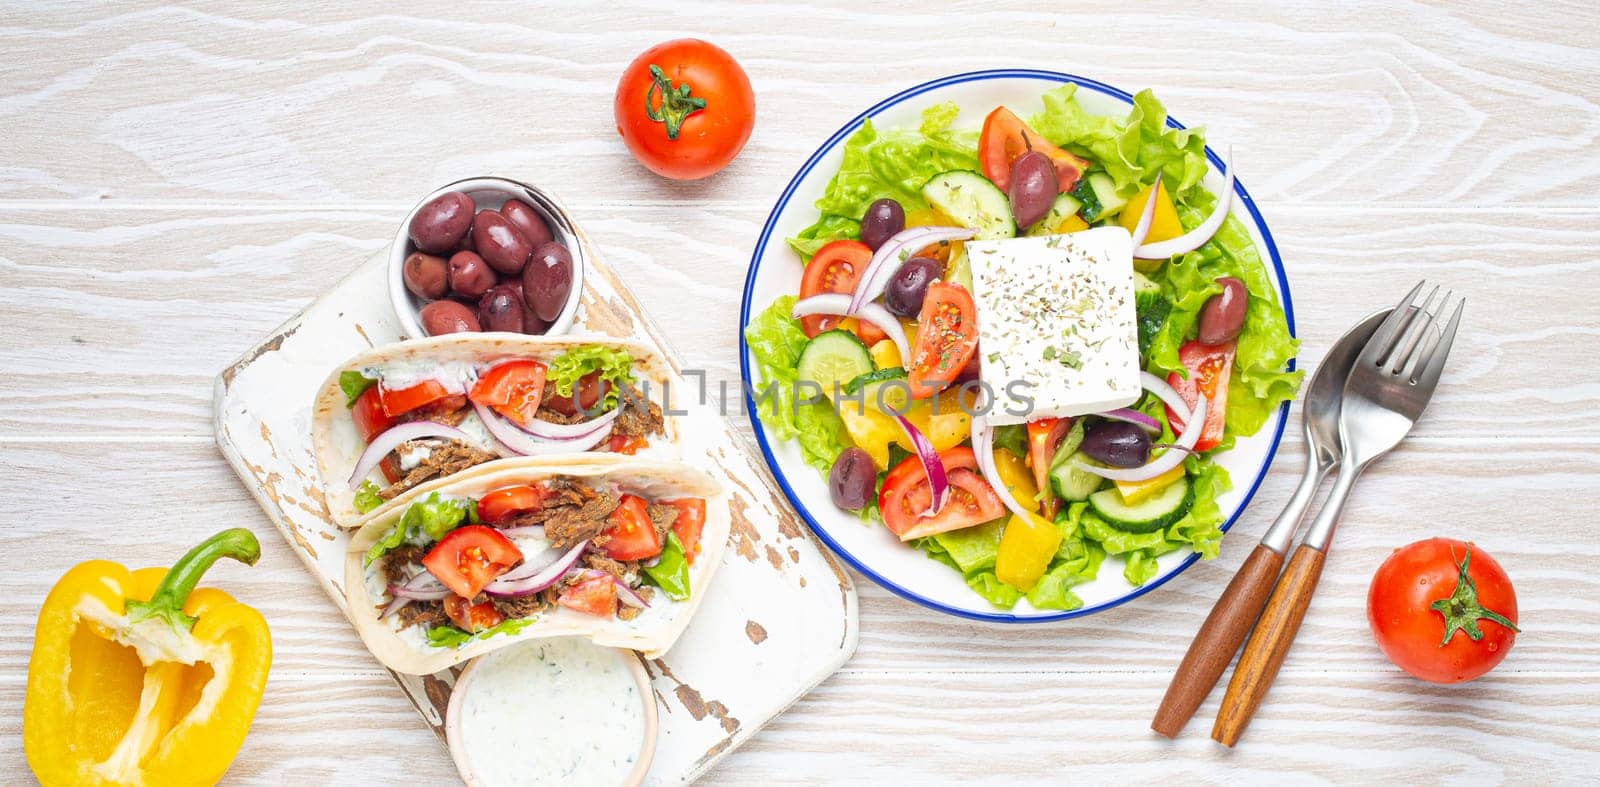 Traditional Greek Food: Greek Salad, Gyros with meat and vegetables, Tzatziki sauce, Olives on White rustic wooden table background from above. Cuisine of Greece by its_al_dente